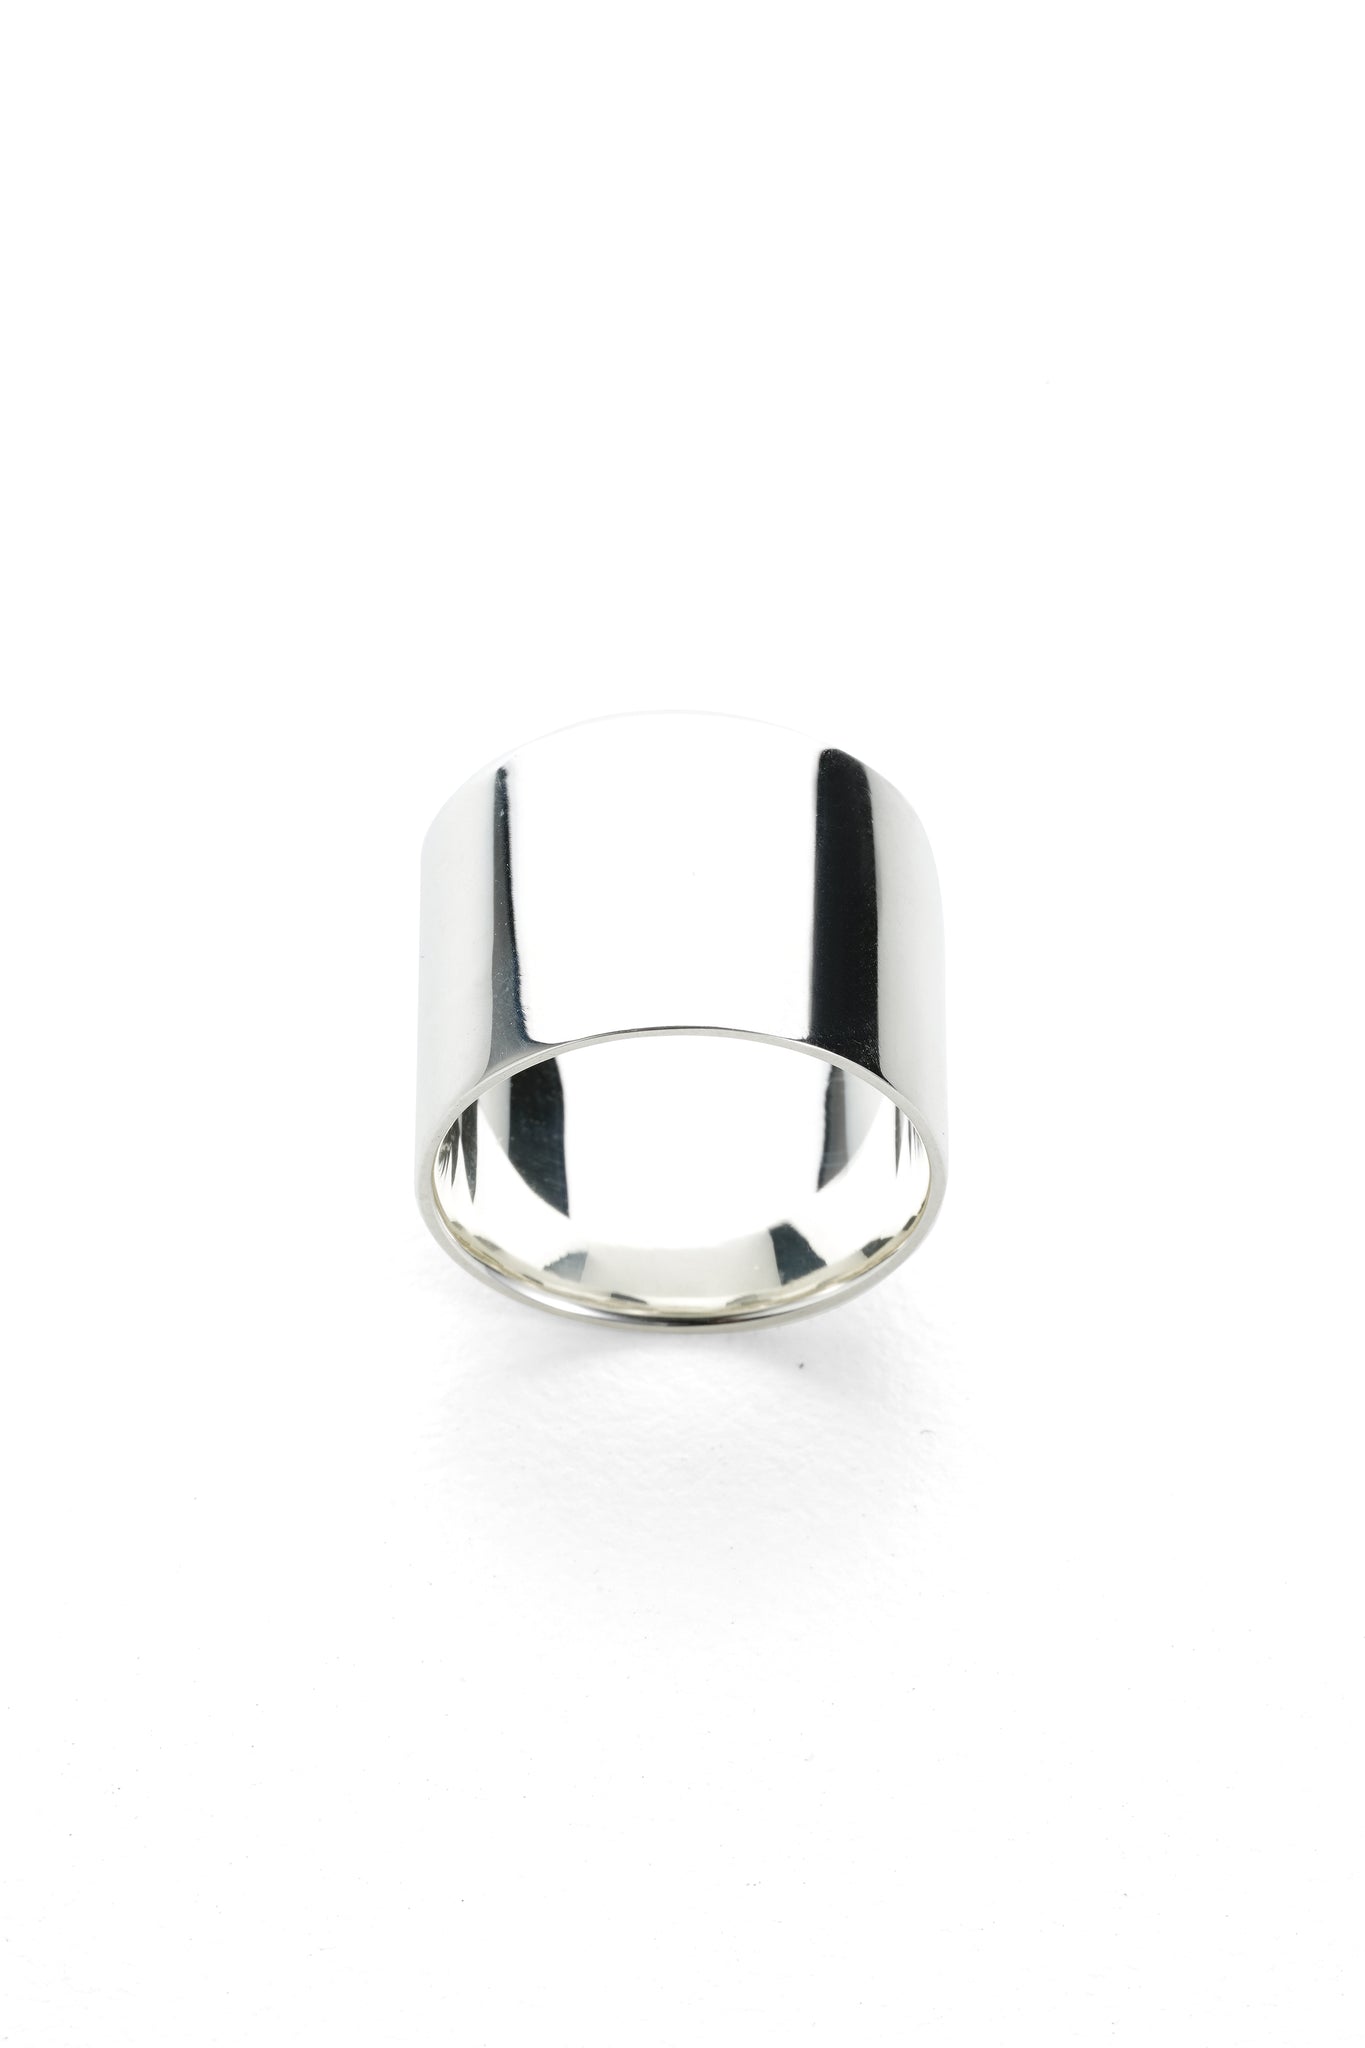 PT RING 04(SILVER925)